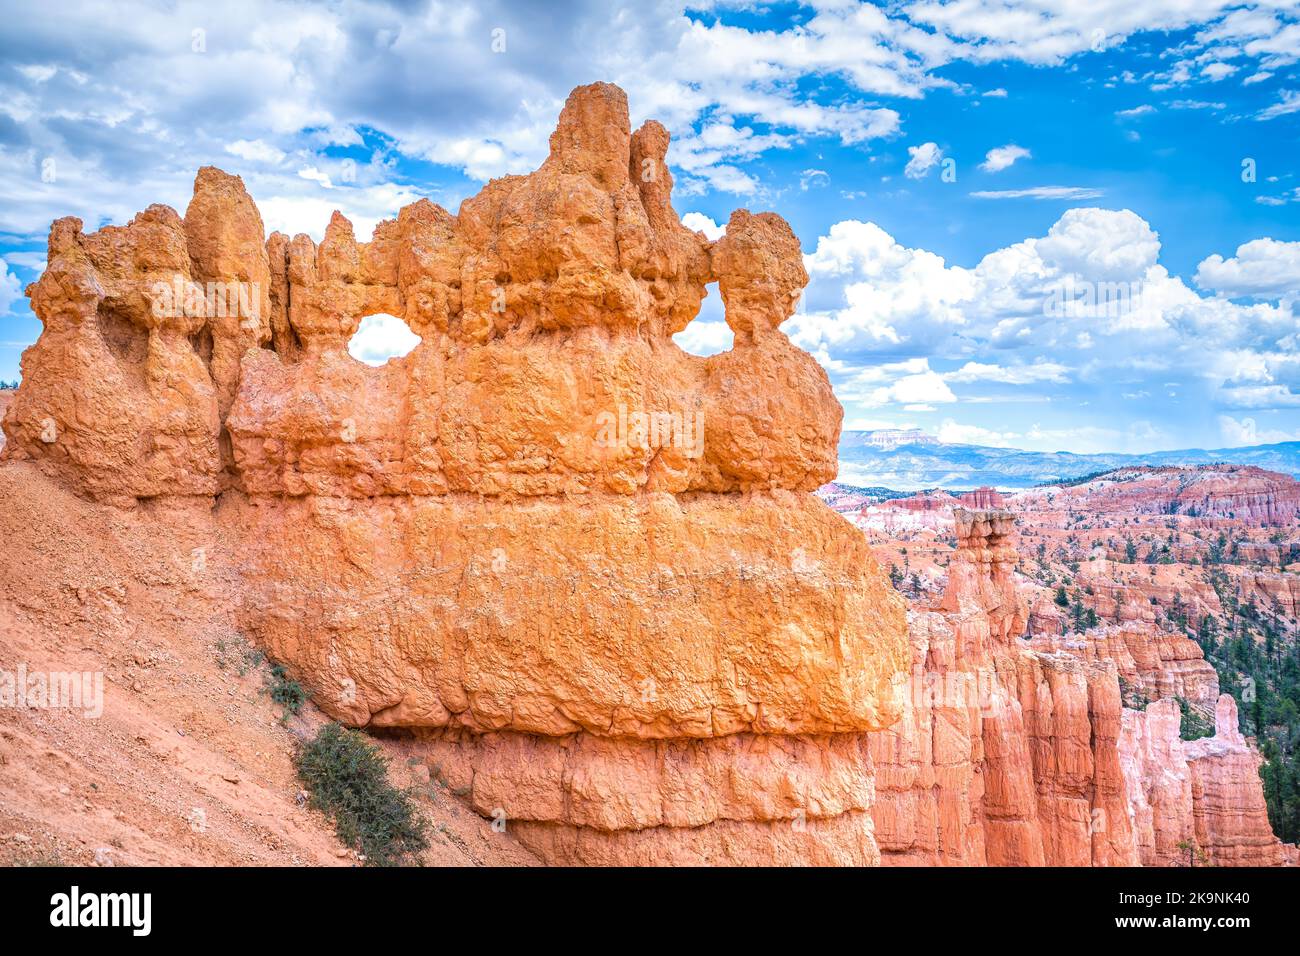 High angle above aerial view of orange sandstone hoodoos rock formations at Bryce Canyon National Park, Utah of Queens Garden Navajo Loop trail Stock Photo